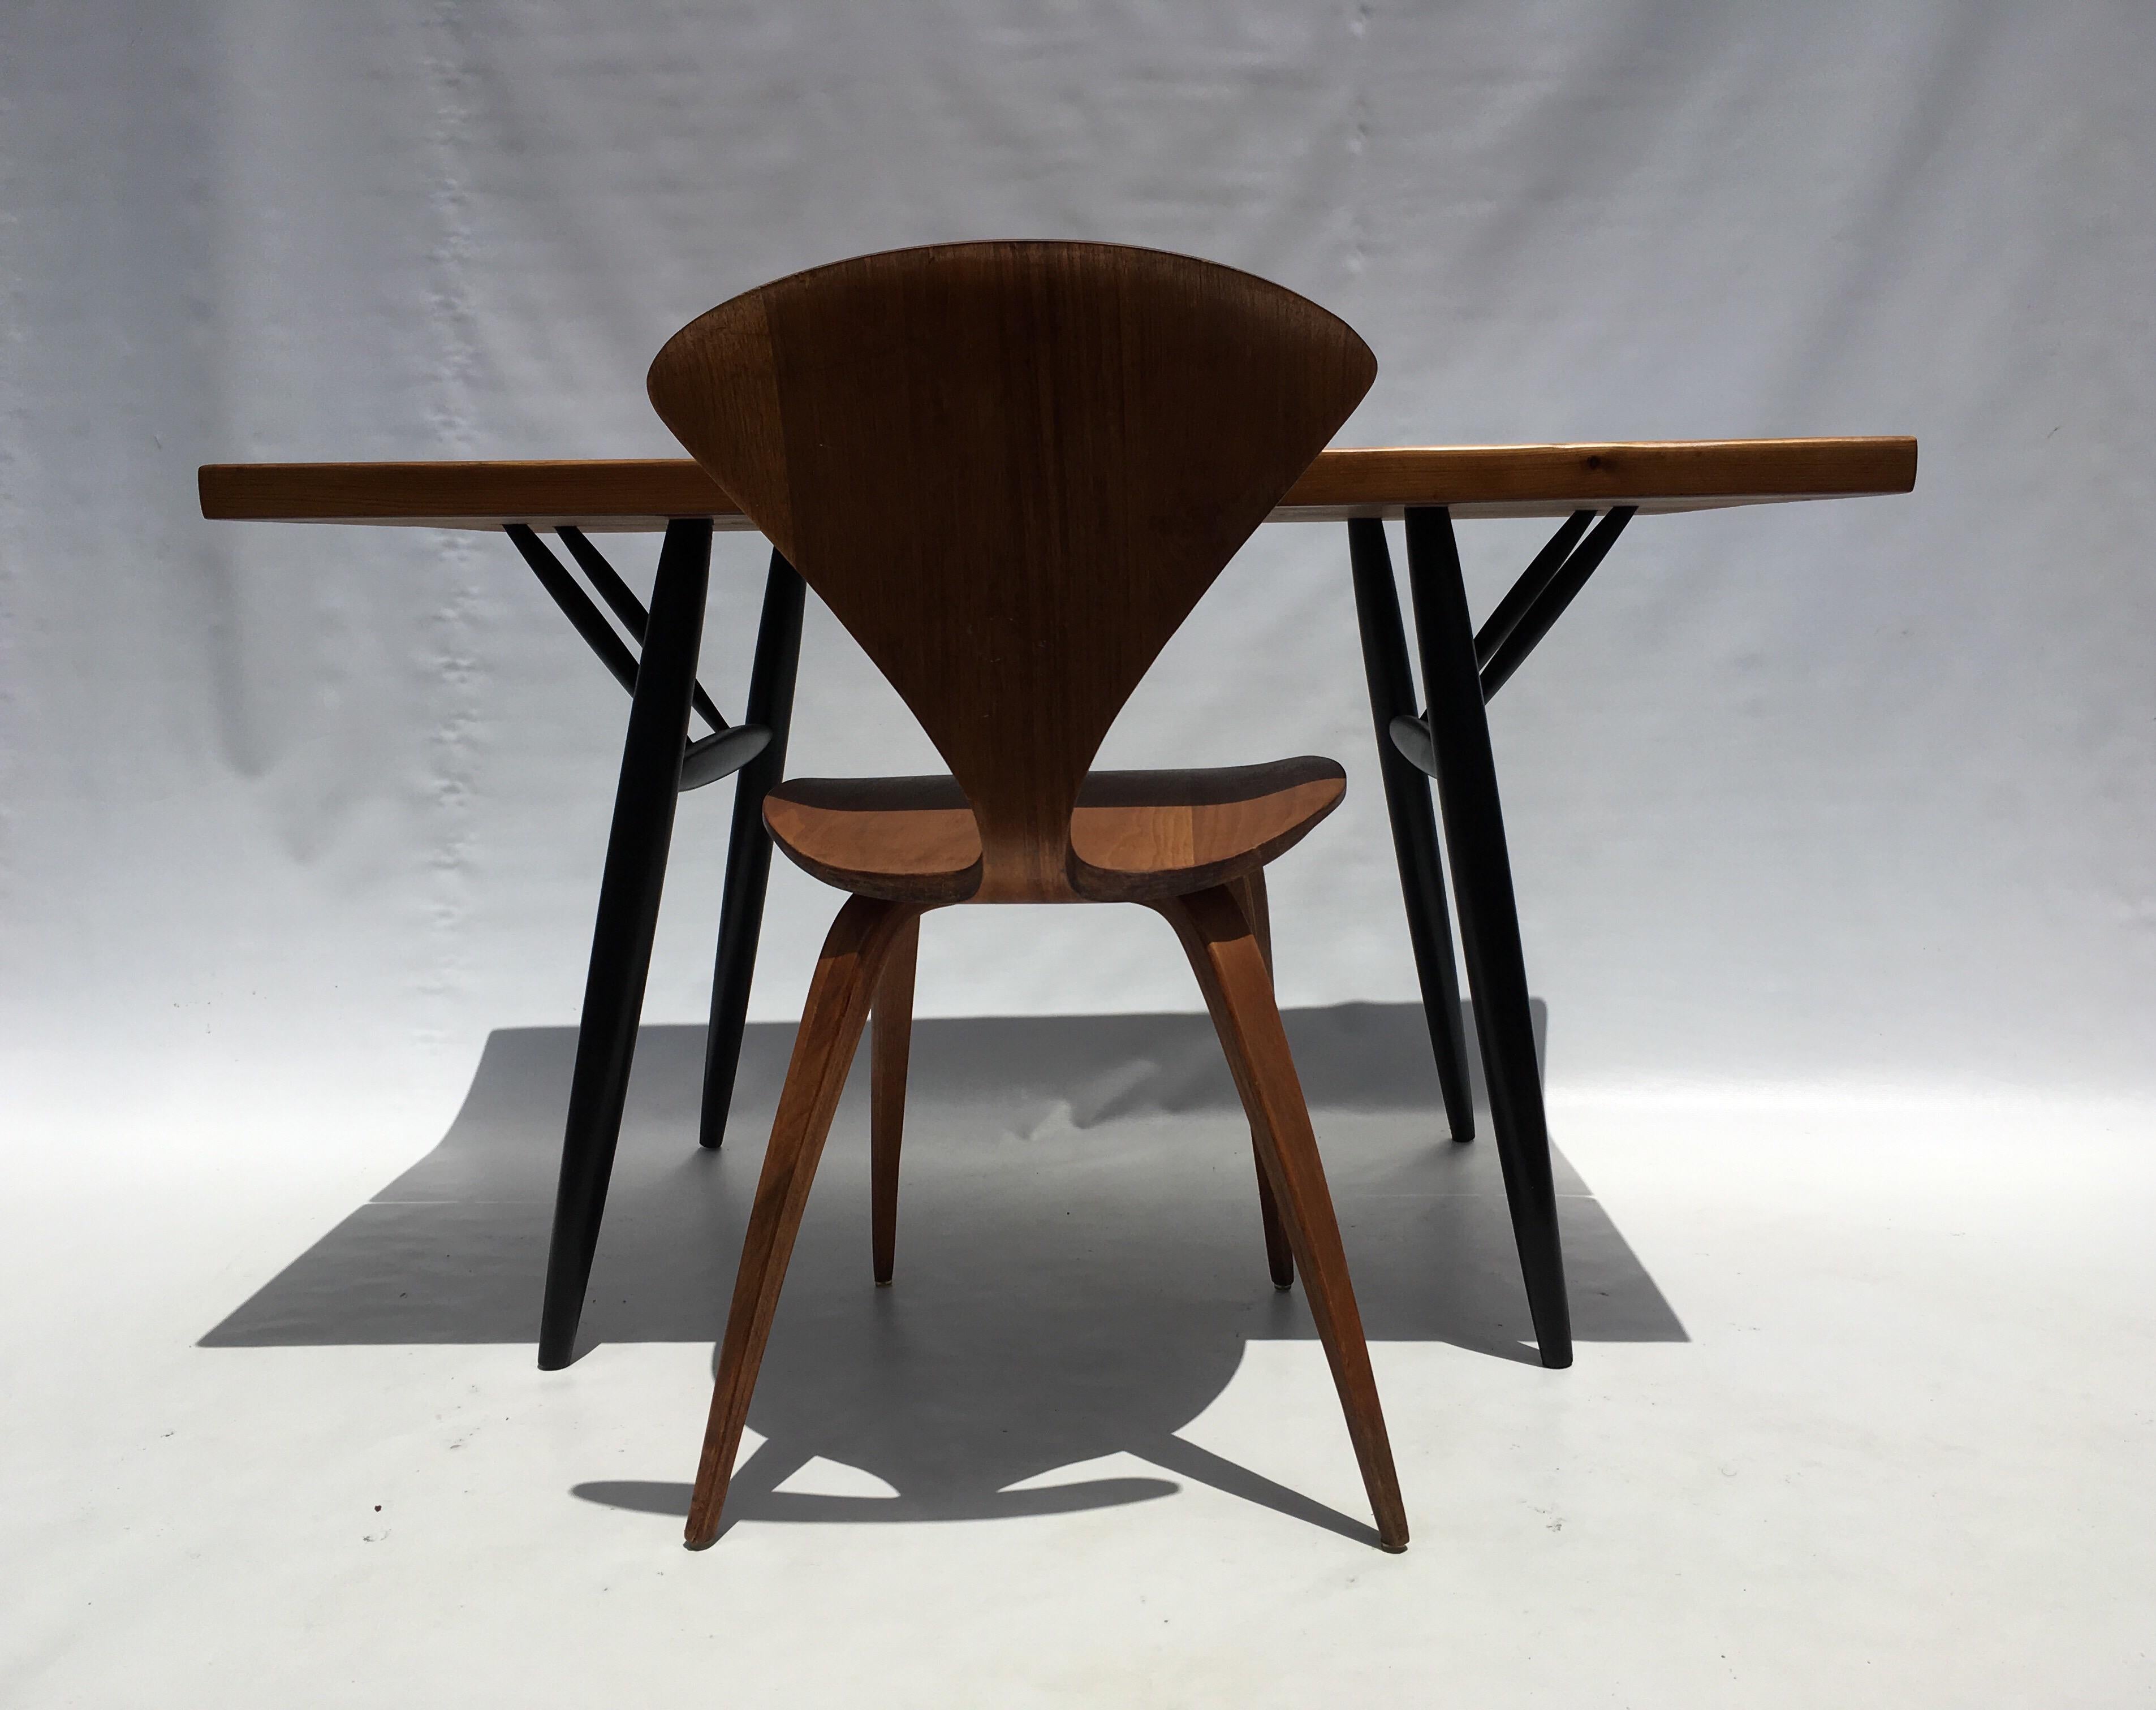 Stained pine desk or table by Ilmari Tapiovaara for Laukaan Puu.
 